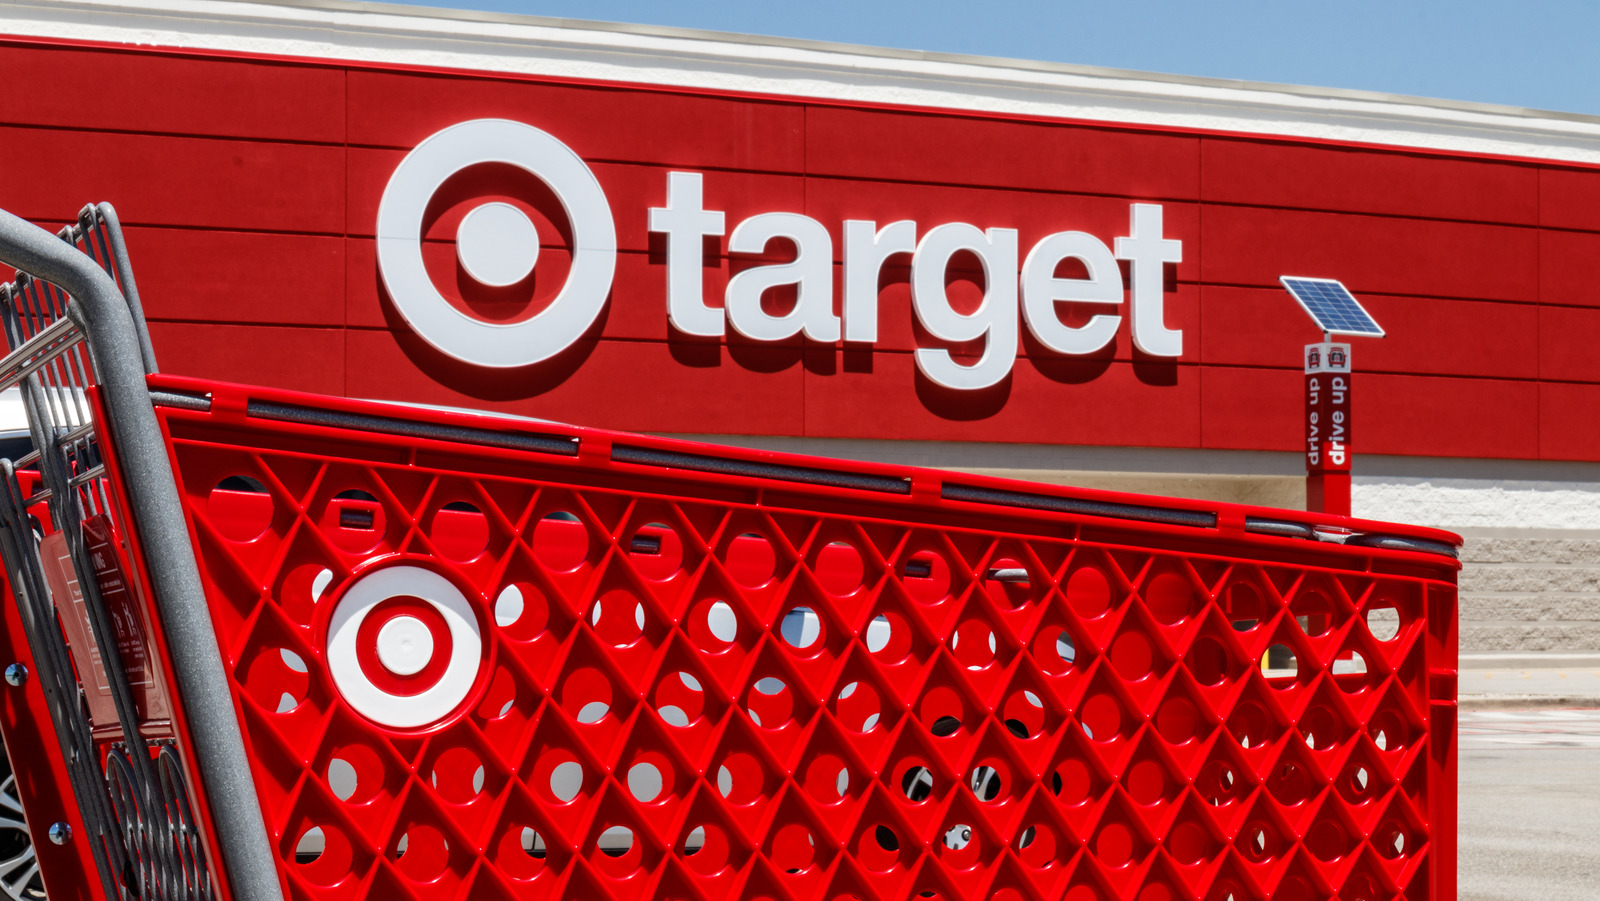 Is Target Open Labor Day 2022?